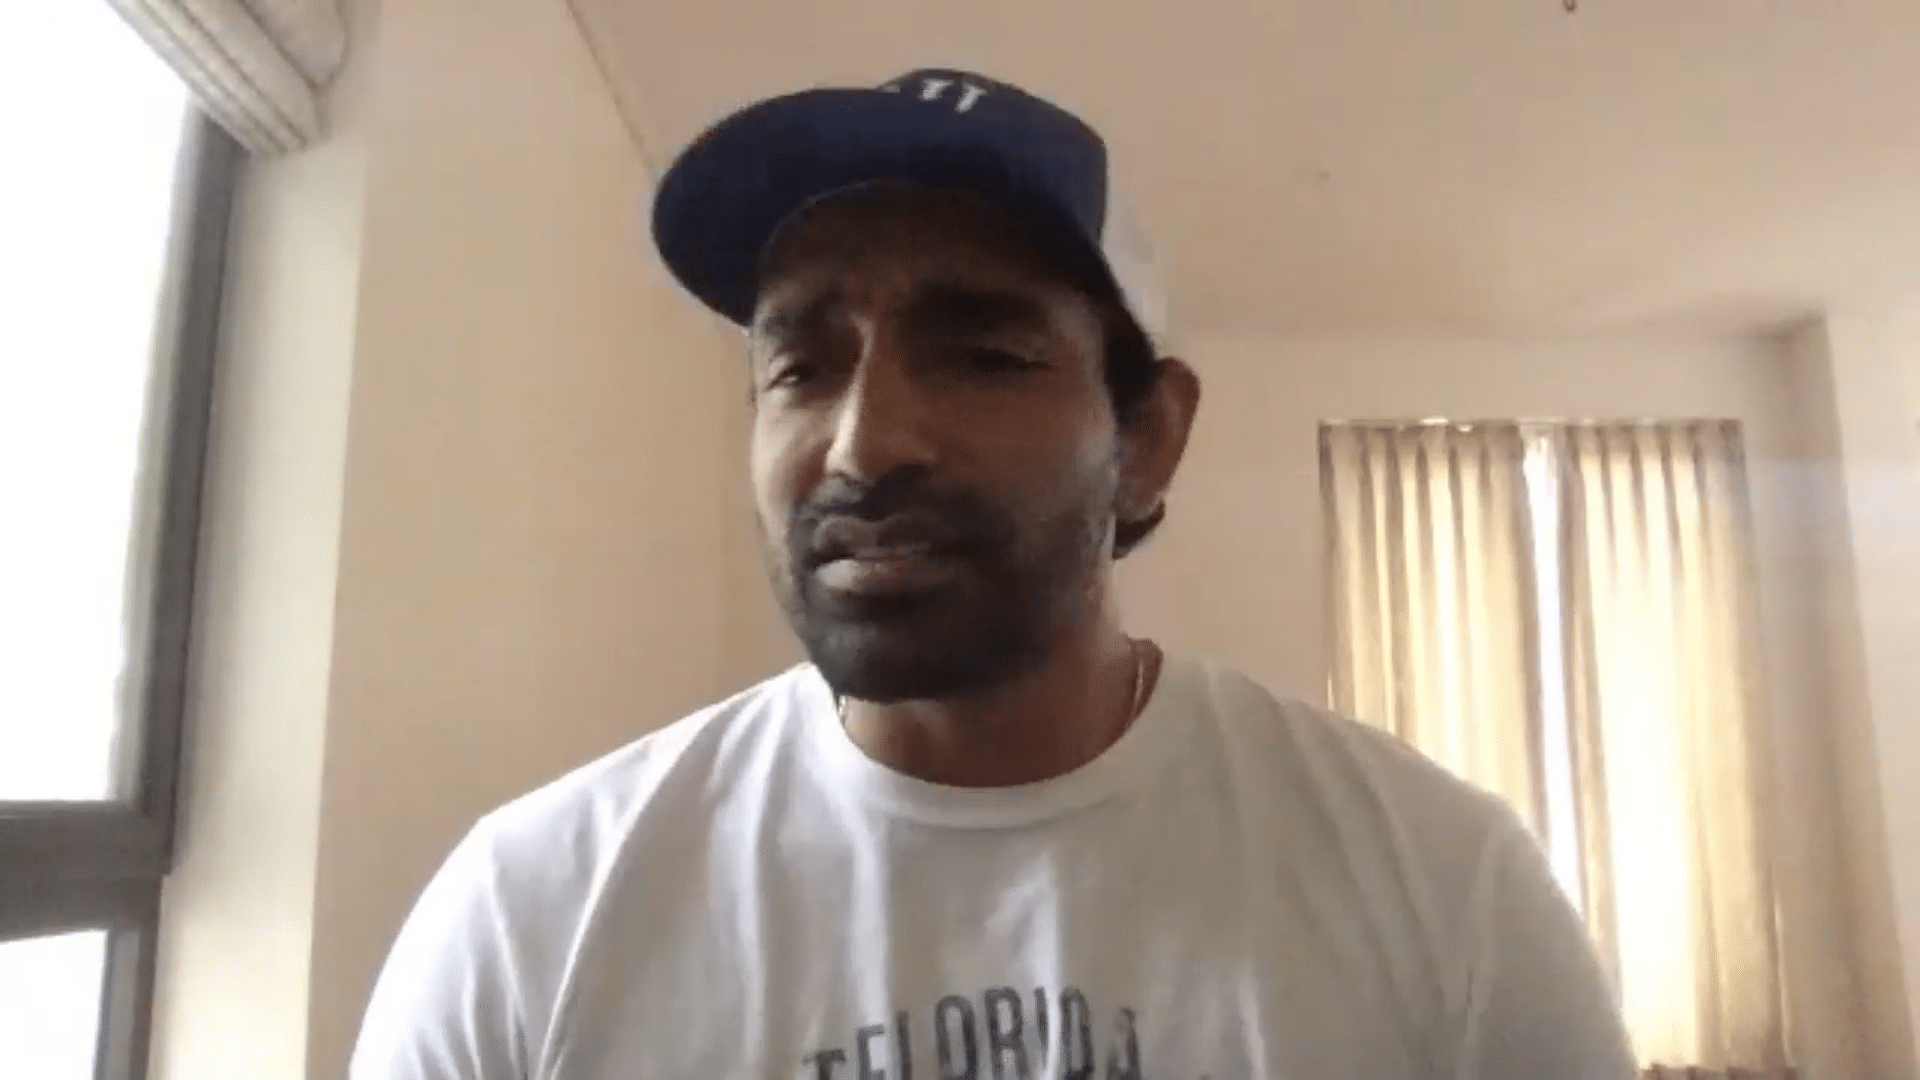 Indian cricketer Robin Uthappa says he thought about taking his life at one point, but speaking to his counsellor helped him recover.